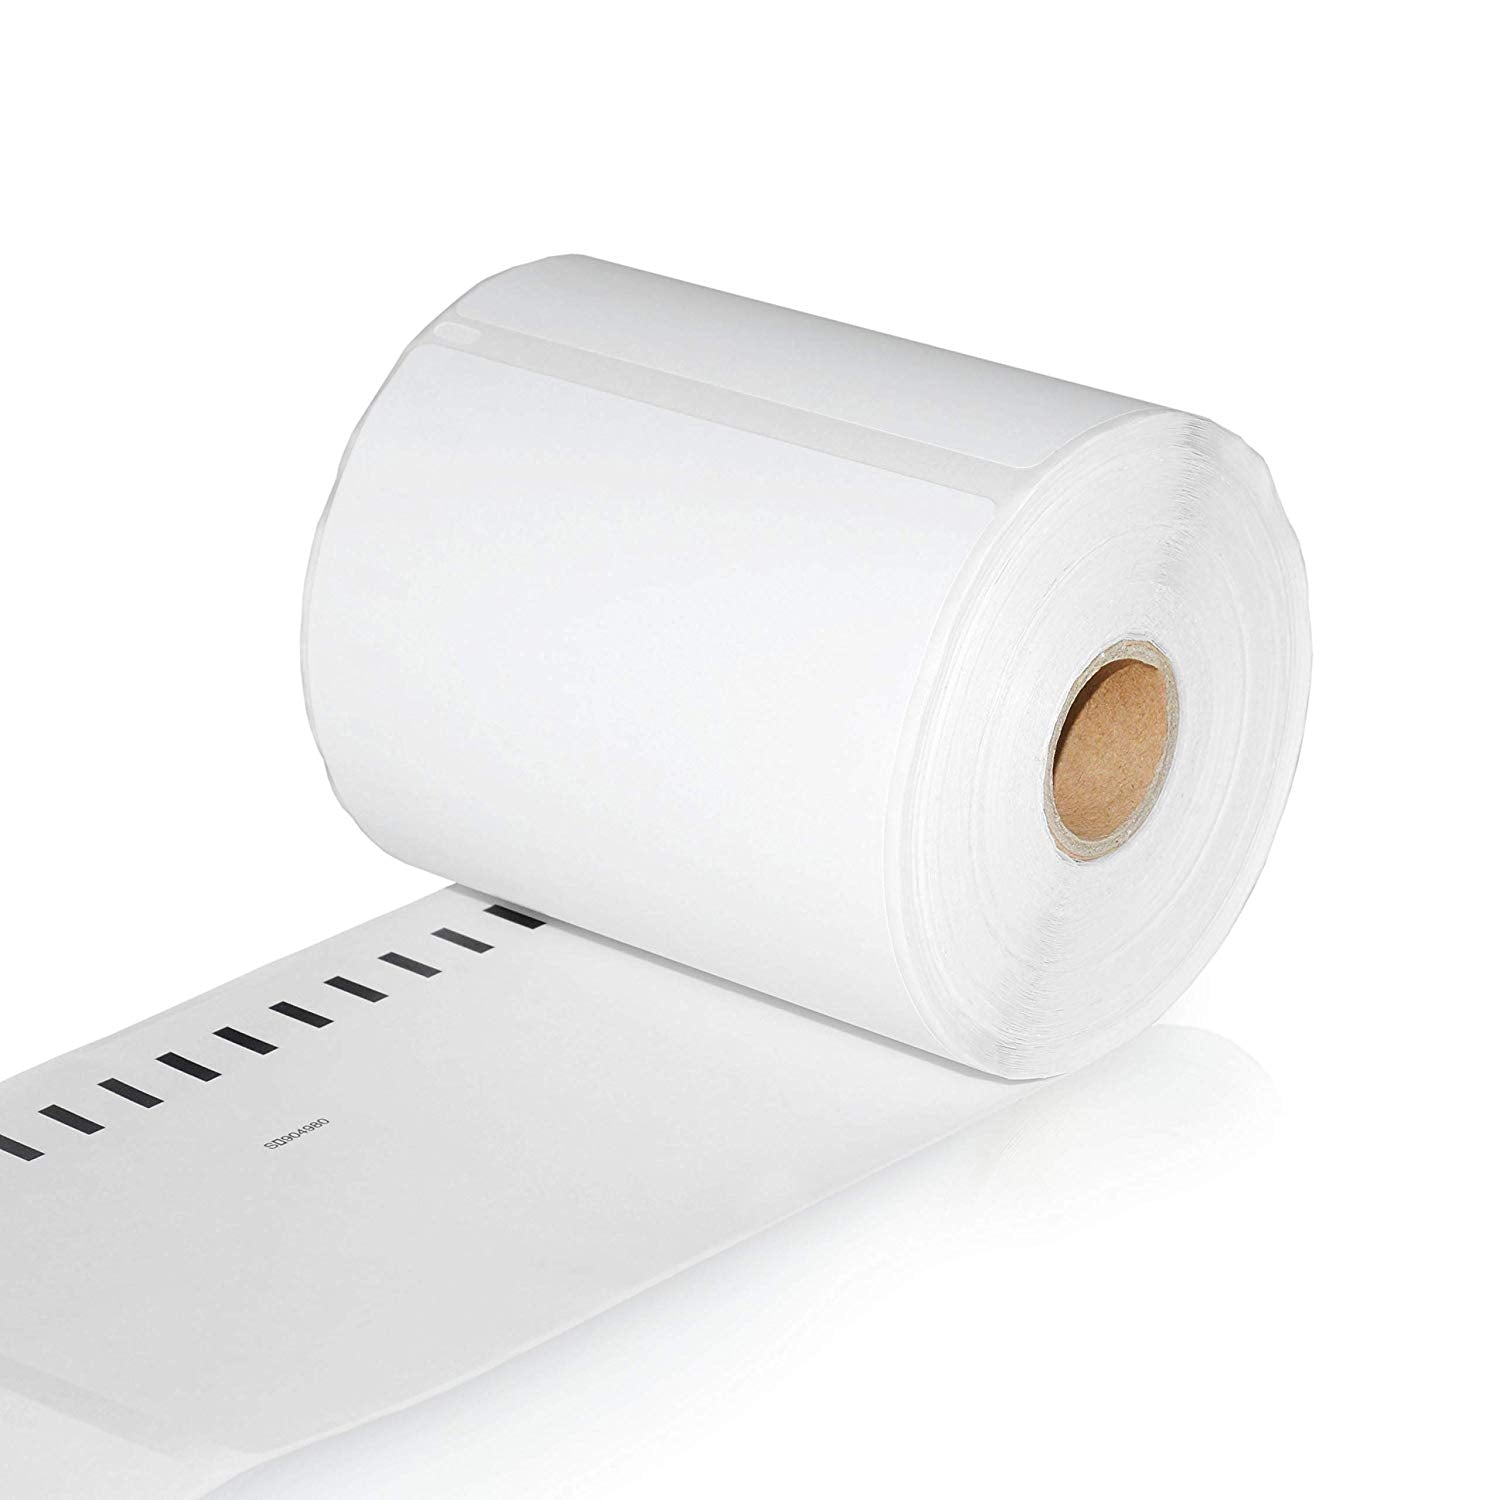 SKY S0904980 104 mm x 159 mm (4' x 6') 220 labels per roll Extra Large Shipping Labels  for Dymo Label Writer 4XL & 5XL